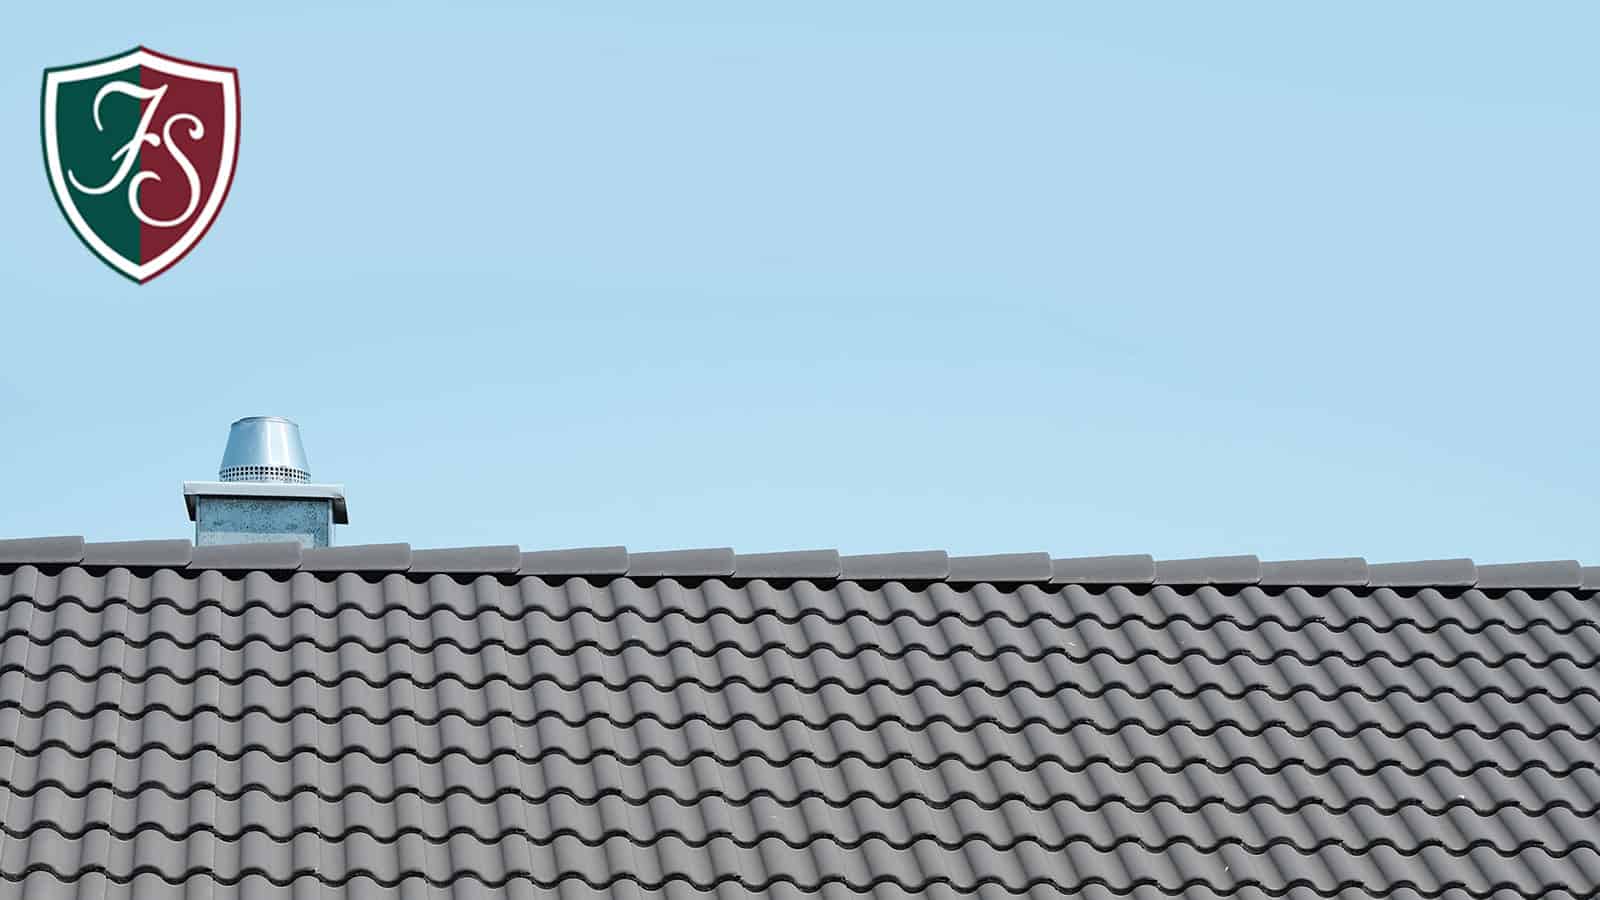 While it’s technically possible, replacing half your roof isn’t a good idea. Here’s why.